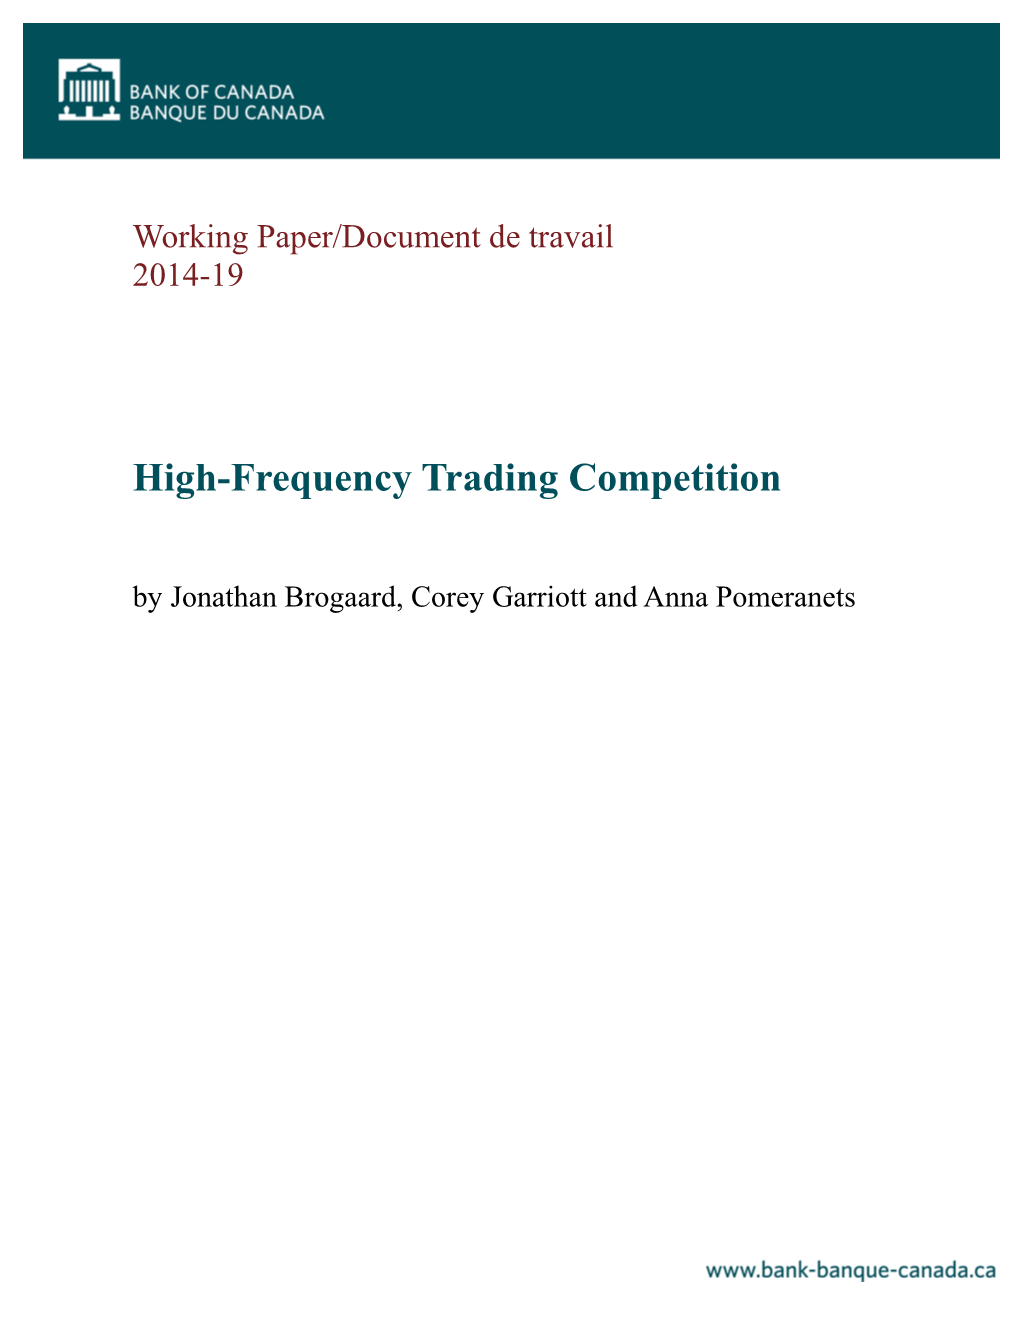 High-Frequency Trading Competition by Jonathan Brogaard, Corey Garriott and Anna Pomeranets